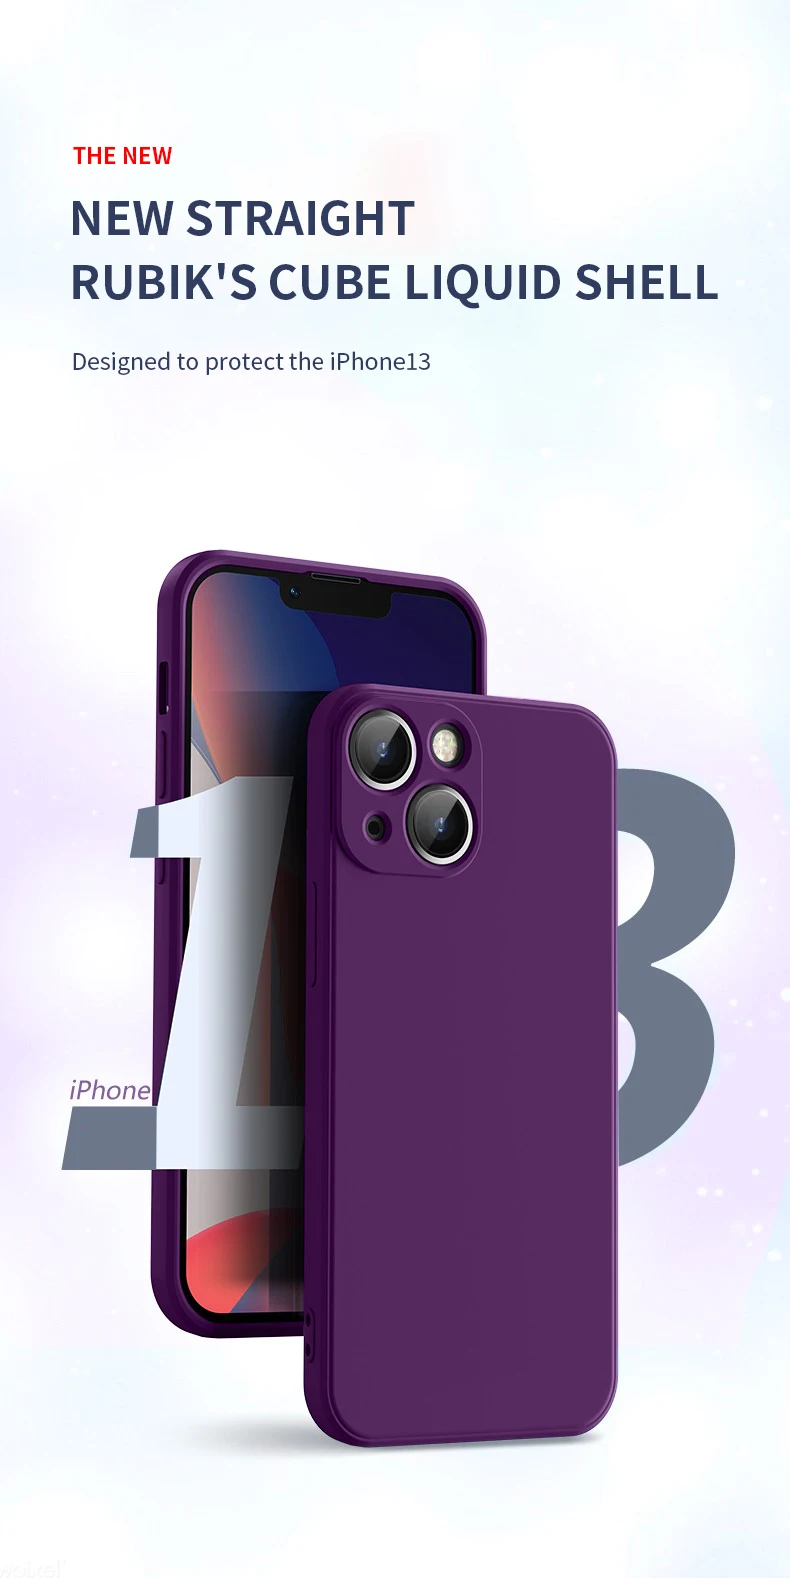 3CG Silicone Soft Phone Case For iPhone 11 13 12 Pro Max Mini XS XR Max 7 8 SE 2020 X Plus Lens Full Protection Back Cover Coque leather iphone 12 mini case